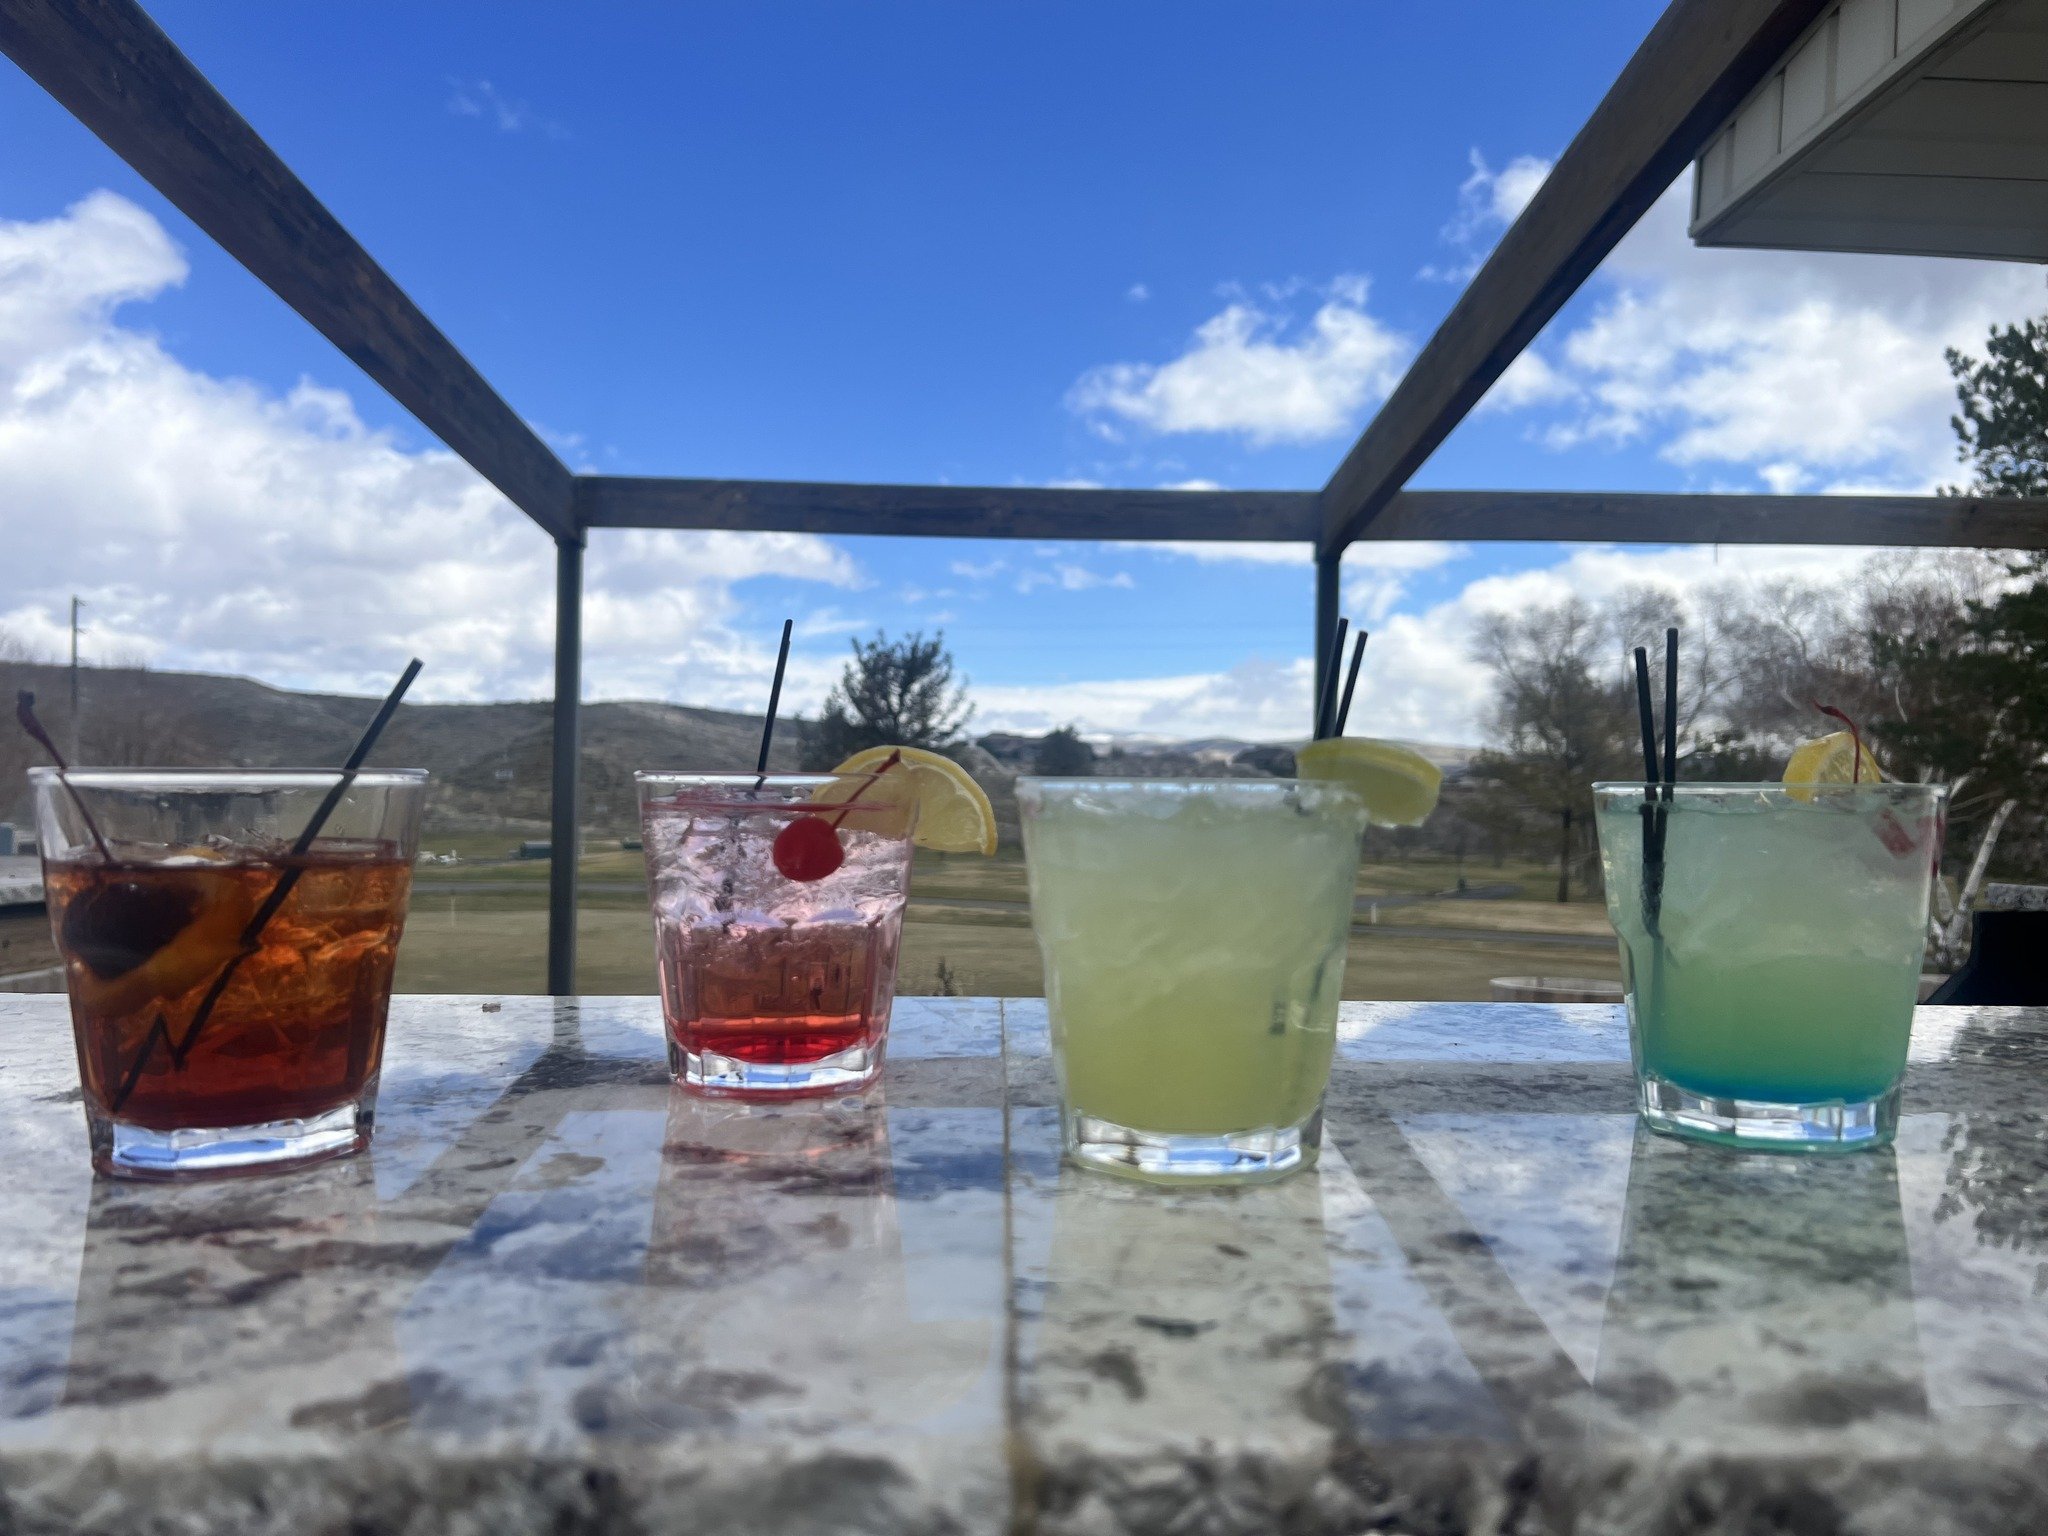 Sip back and relax, the view's on us. 🌅🥂

📍 2100 Ruby View Dr, Elko, NV 89801

#rubyviewgolfcourse #klubrubyview #elkonv